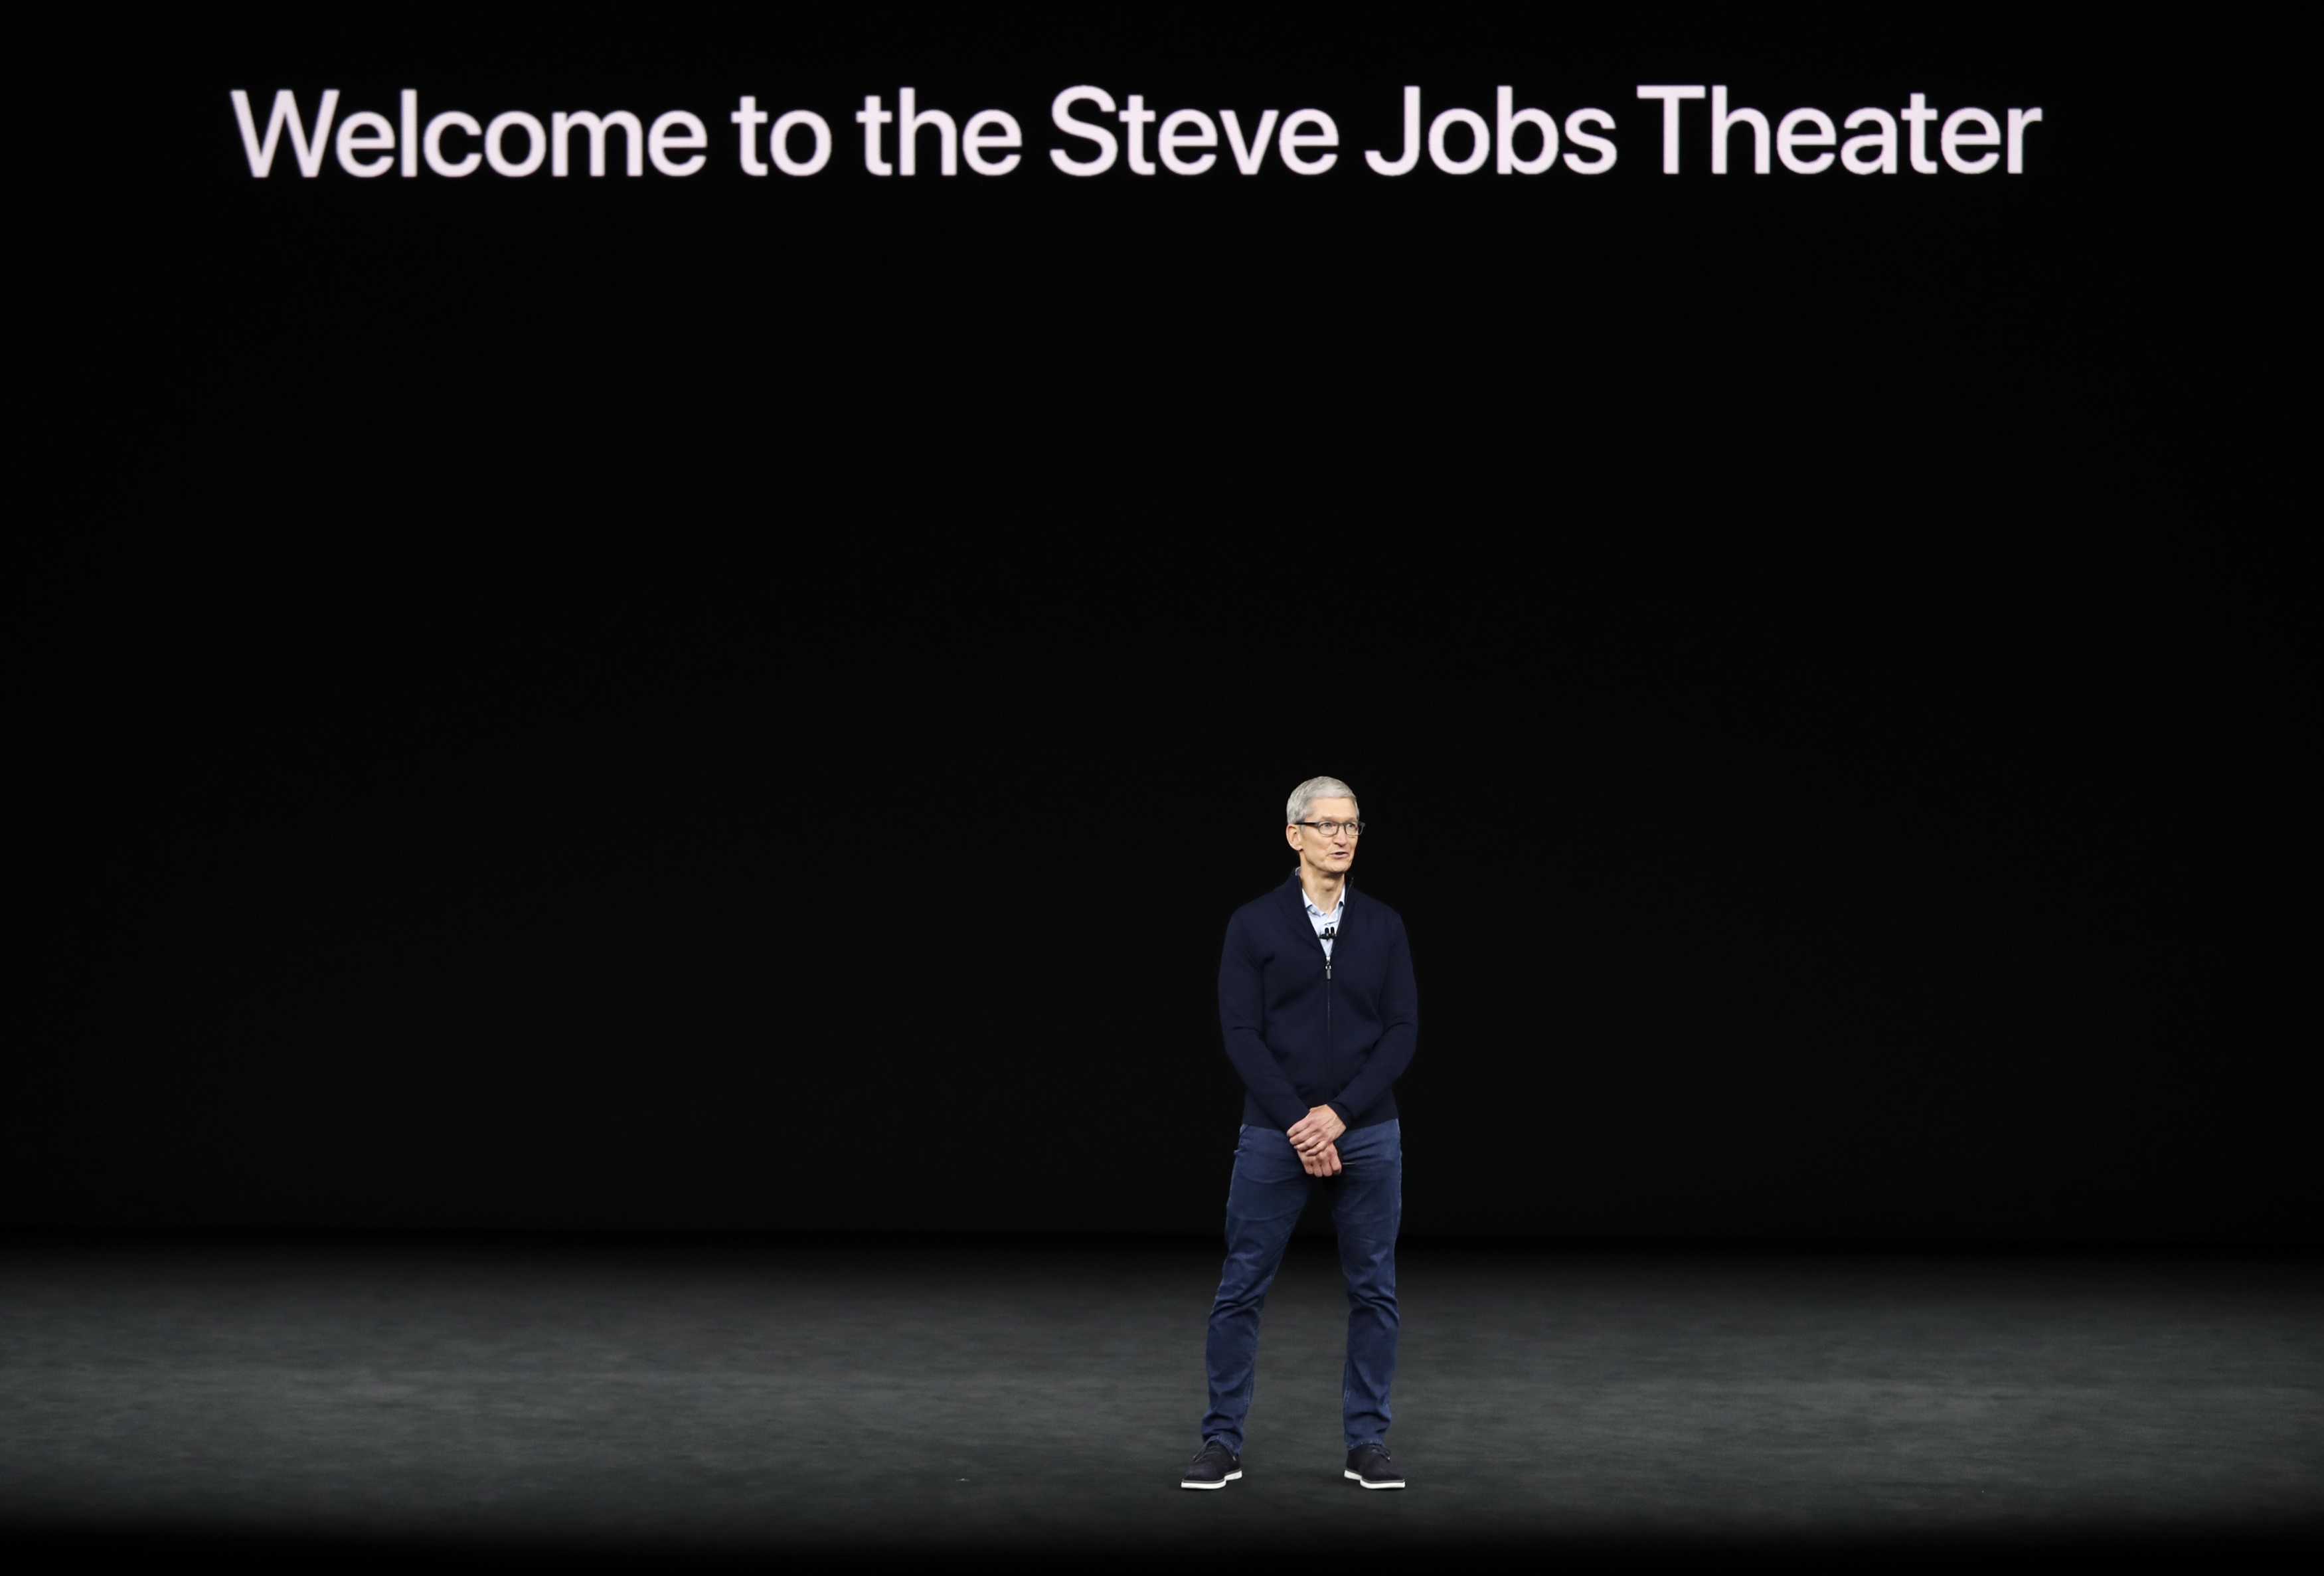 Tim Cook, CEO of Apple, speaks during a product launch event in Cupertino, Calif., on Sept. 12, 2017. (REUTERS/Stephen Lam)